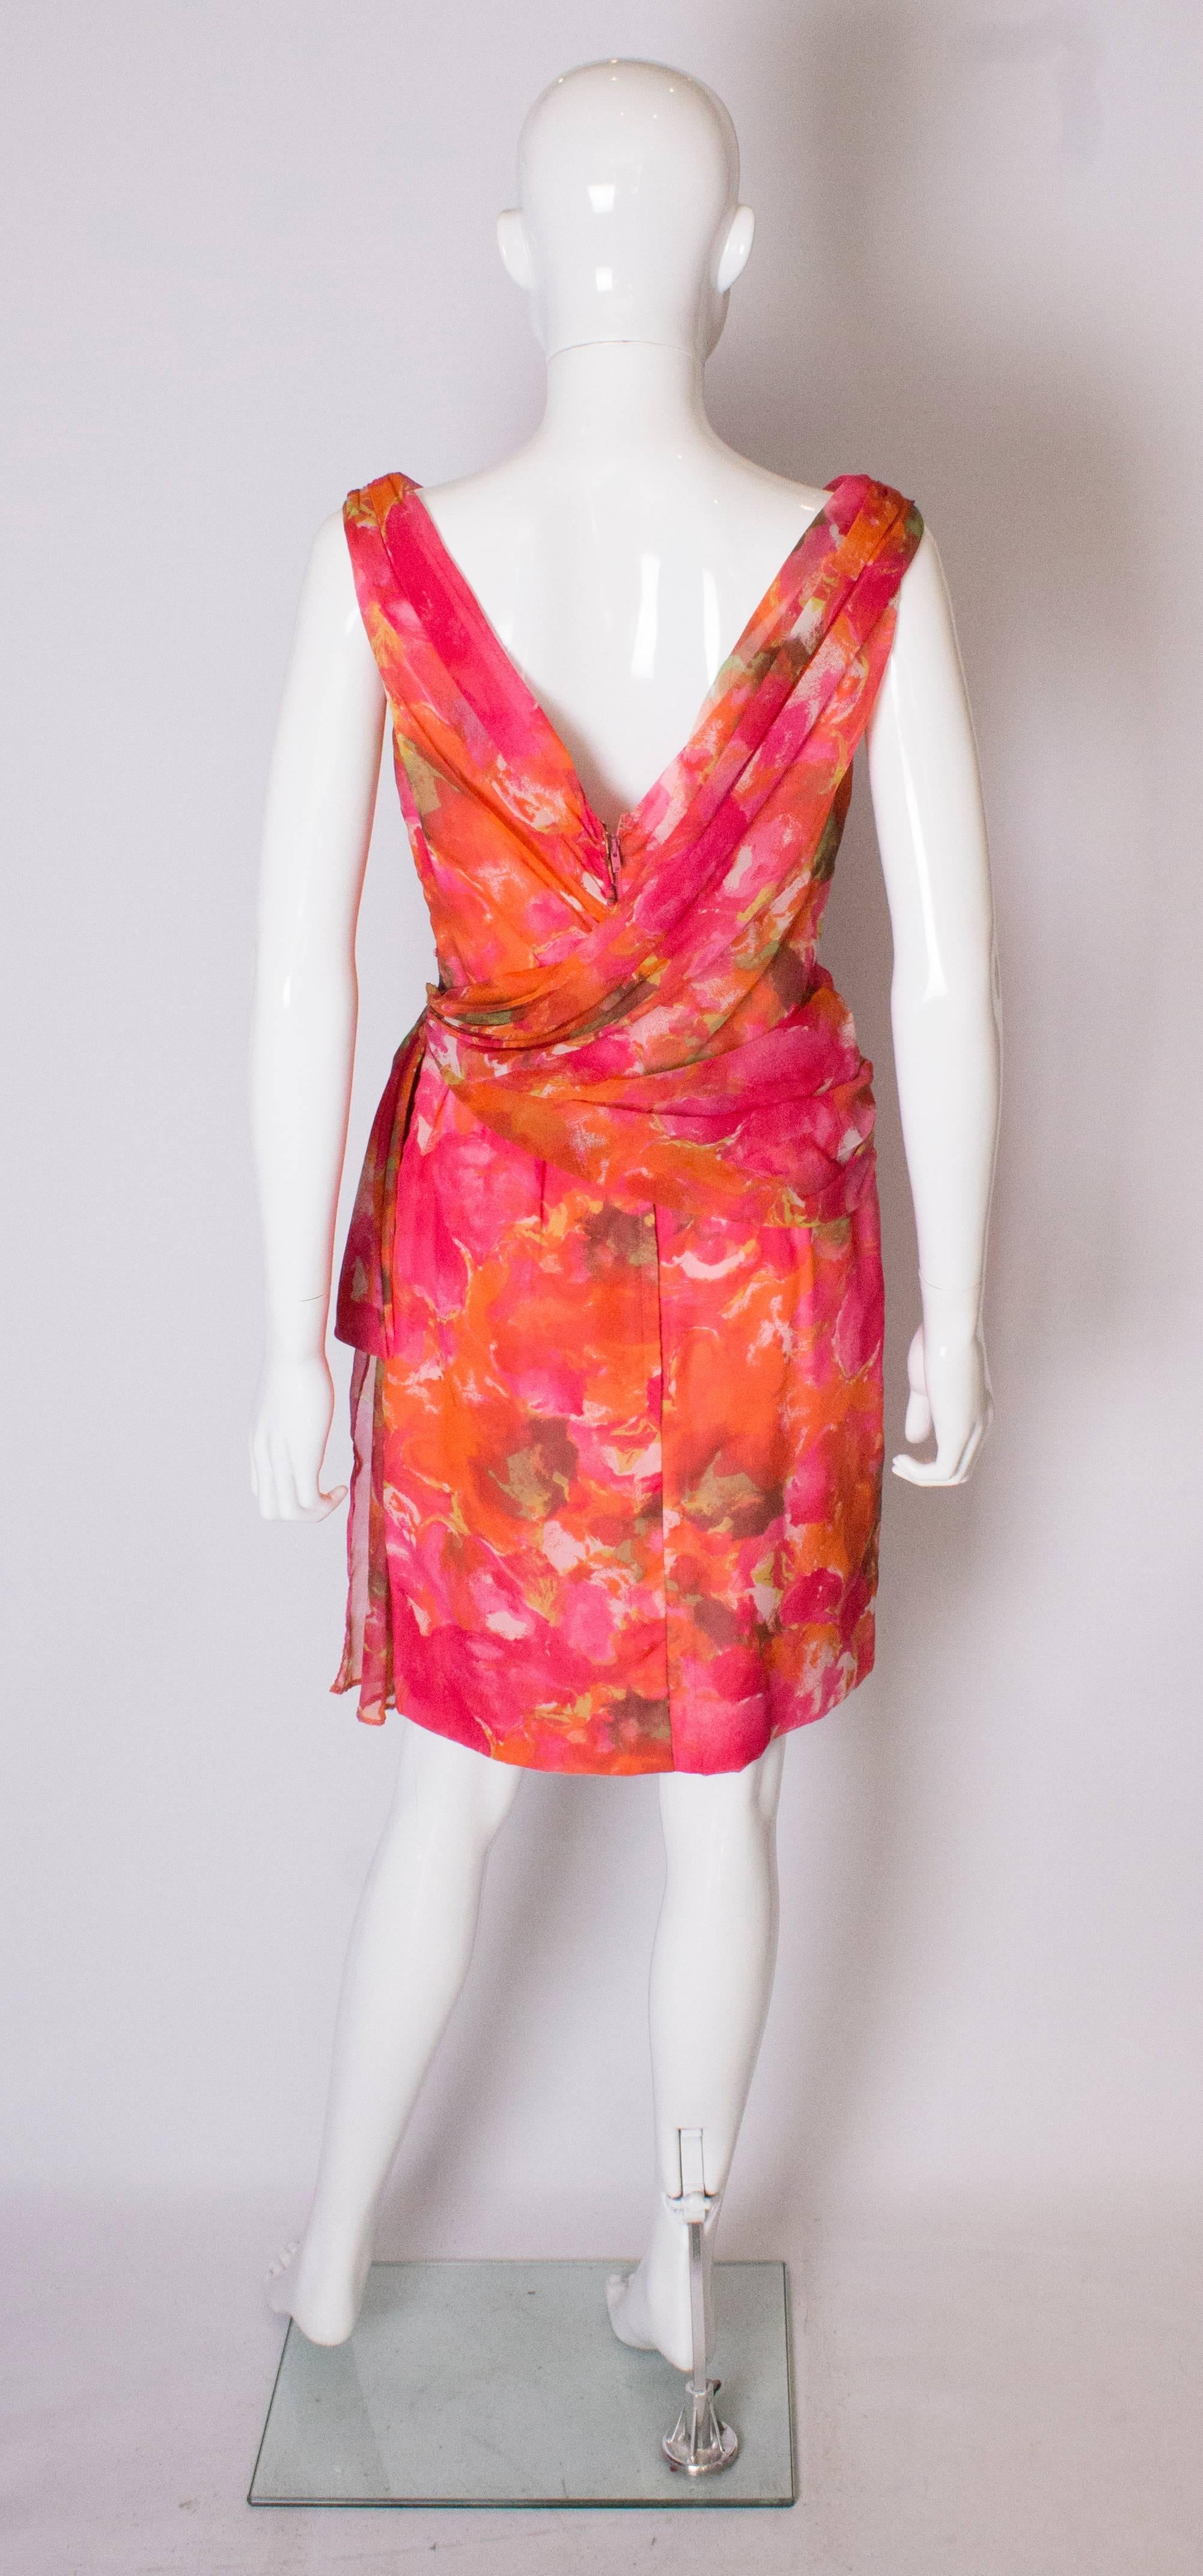 Women's A Vintage 1960s floral printed Cocktail Dress by London Town For Sale